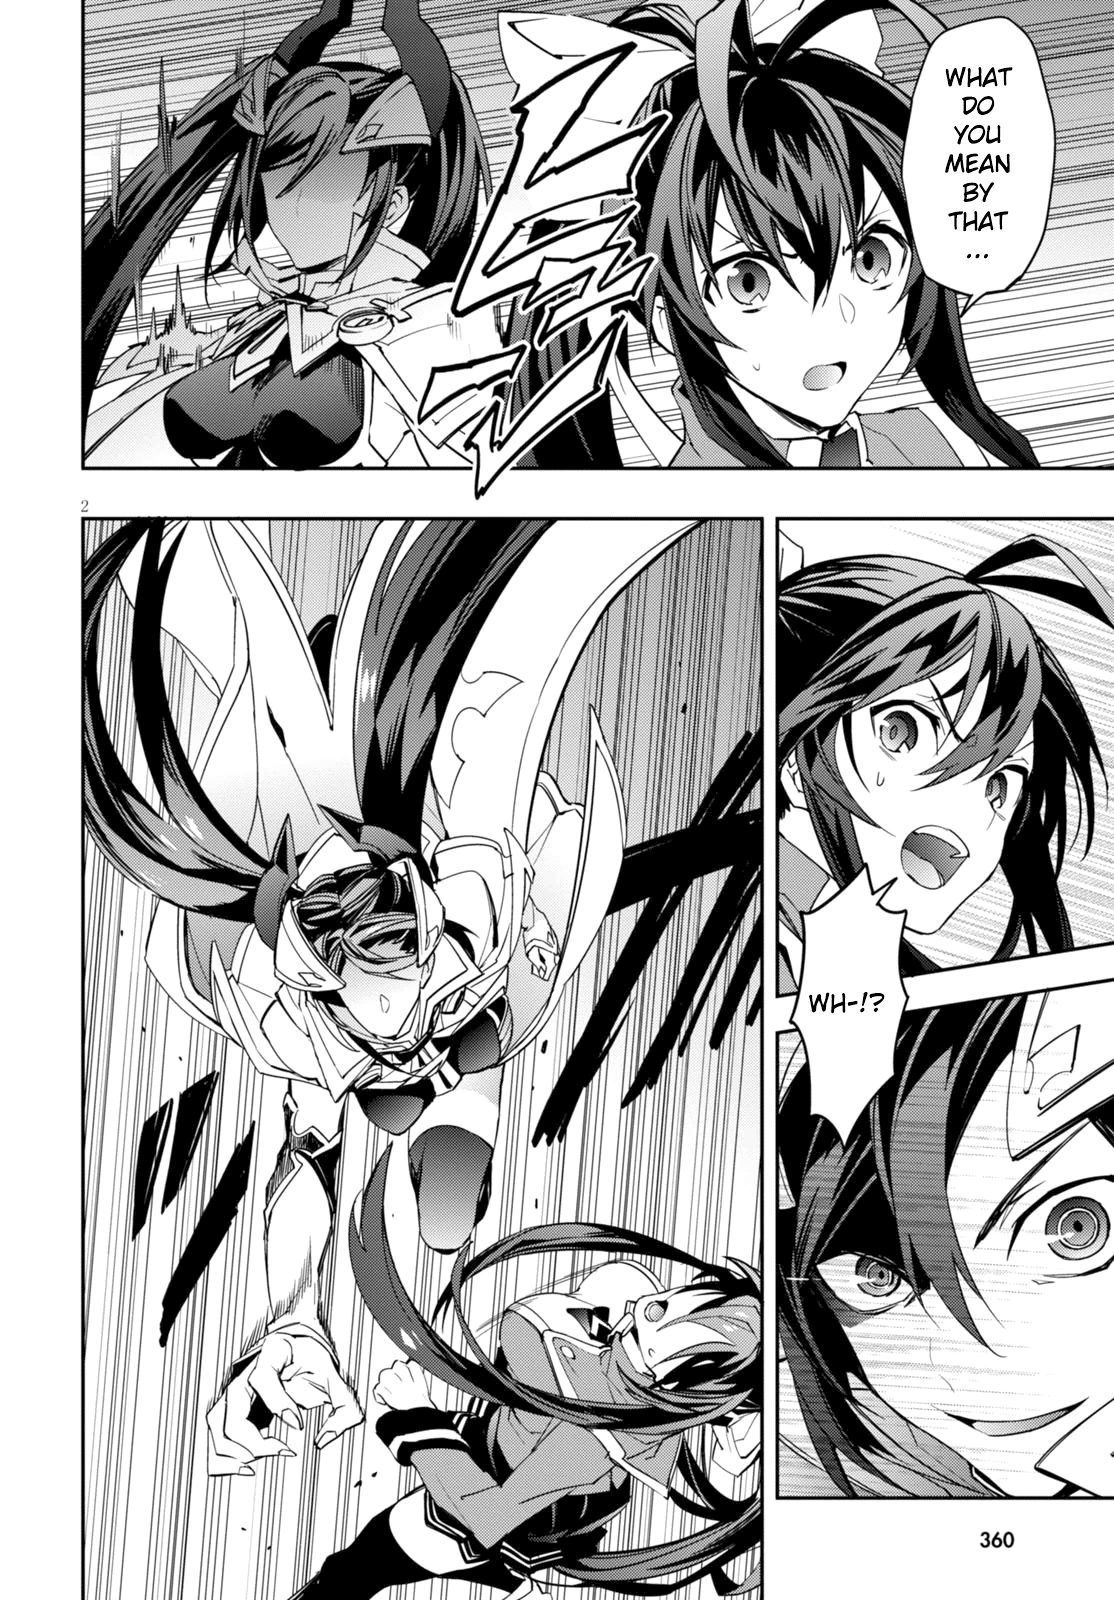 Blazblue - Variable Heart - Page 2